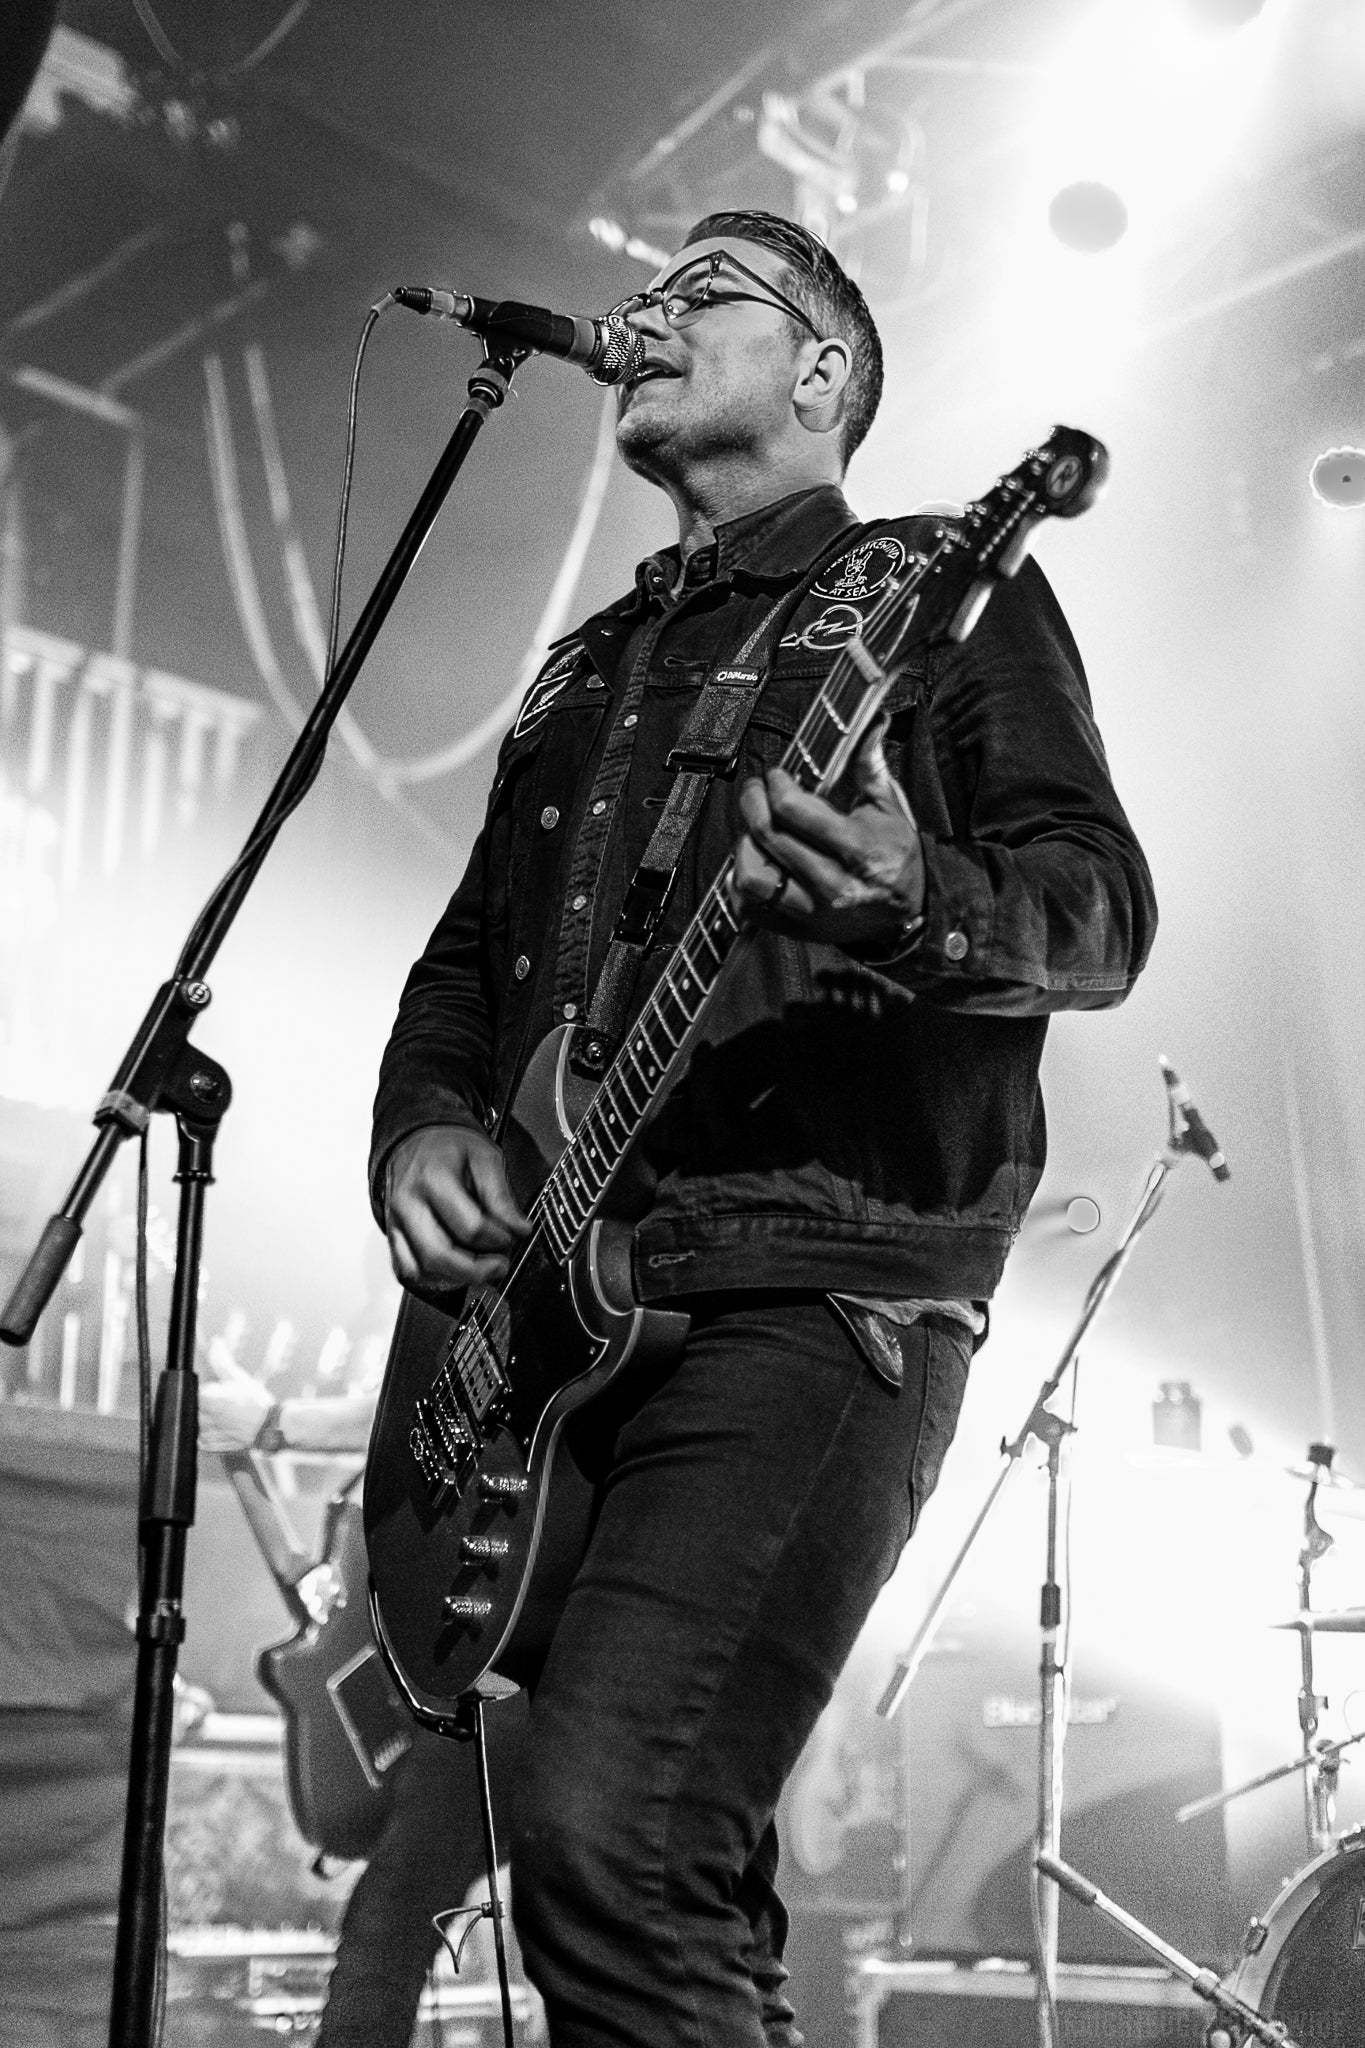 JT Woodruff of Hawthorne Heights, live at the Opera House in Toronto, December 16, 2018